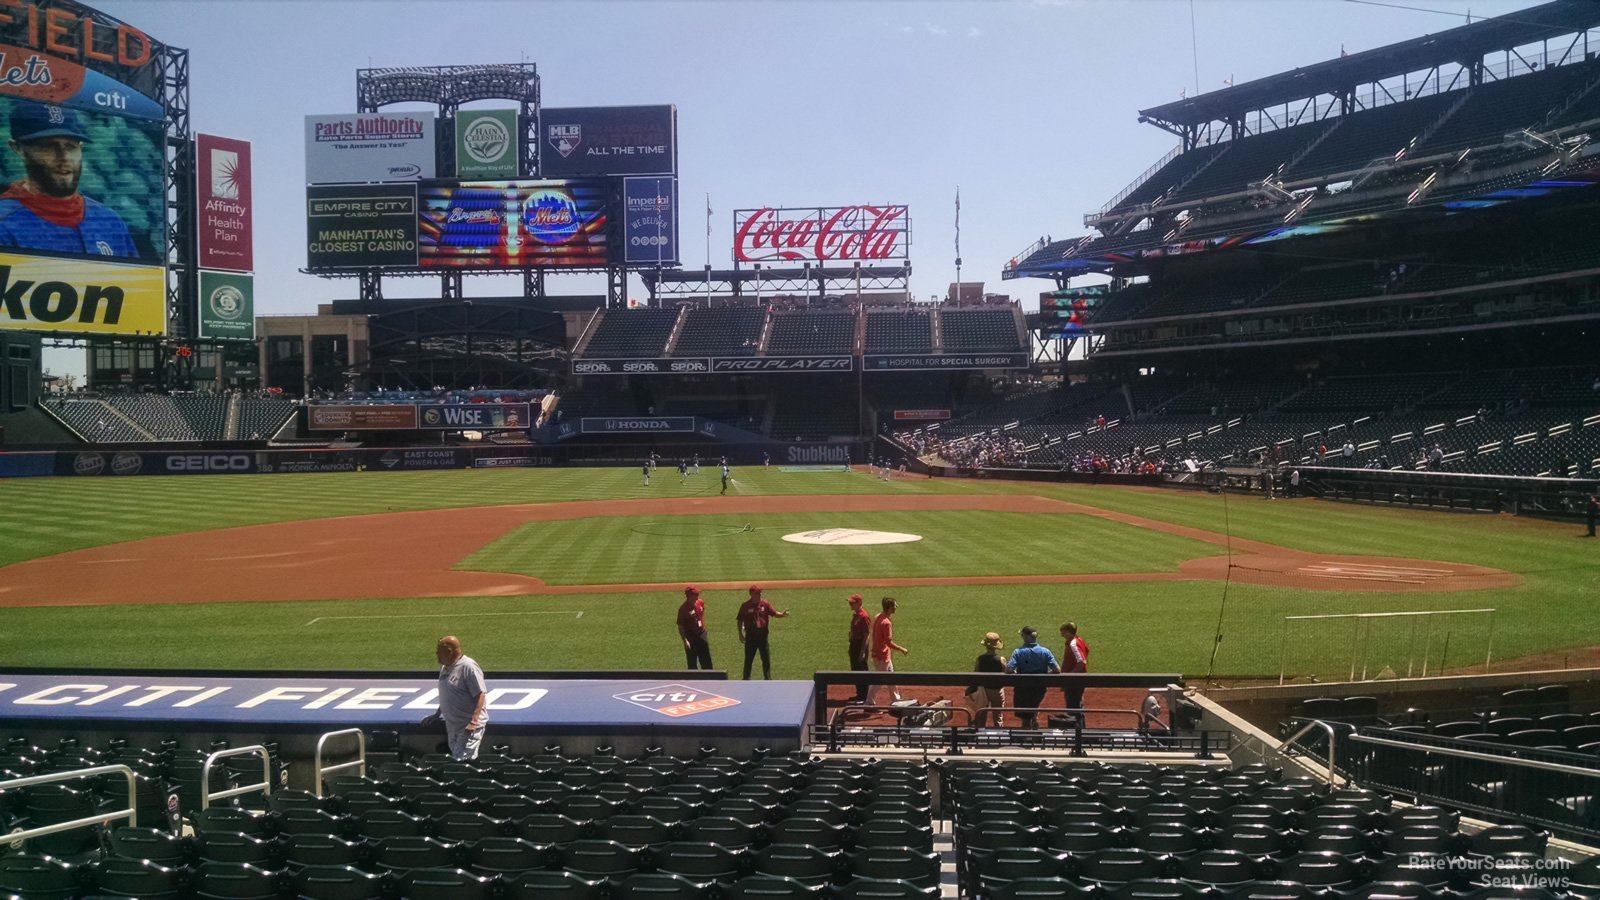 section 121, row 14 seat view  - citi field